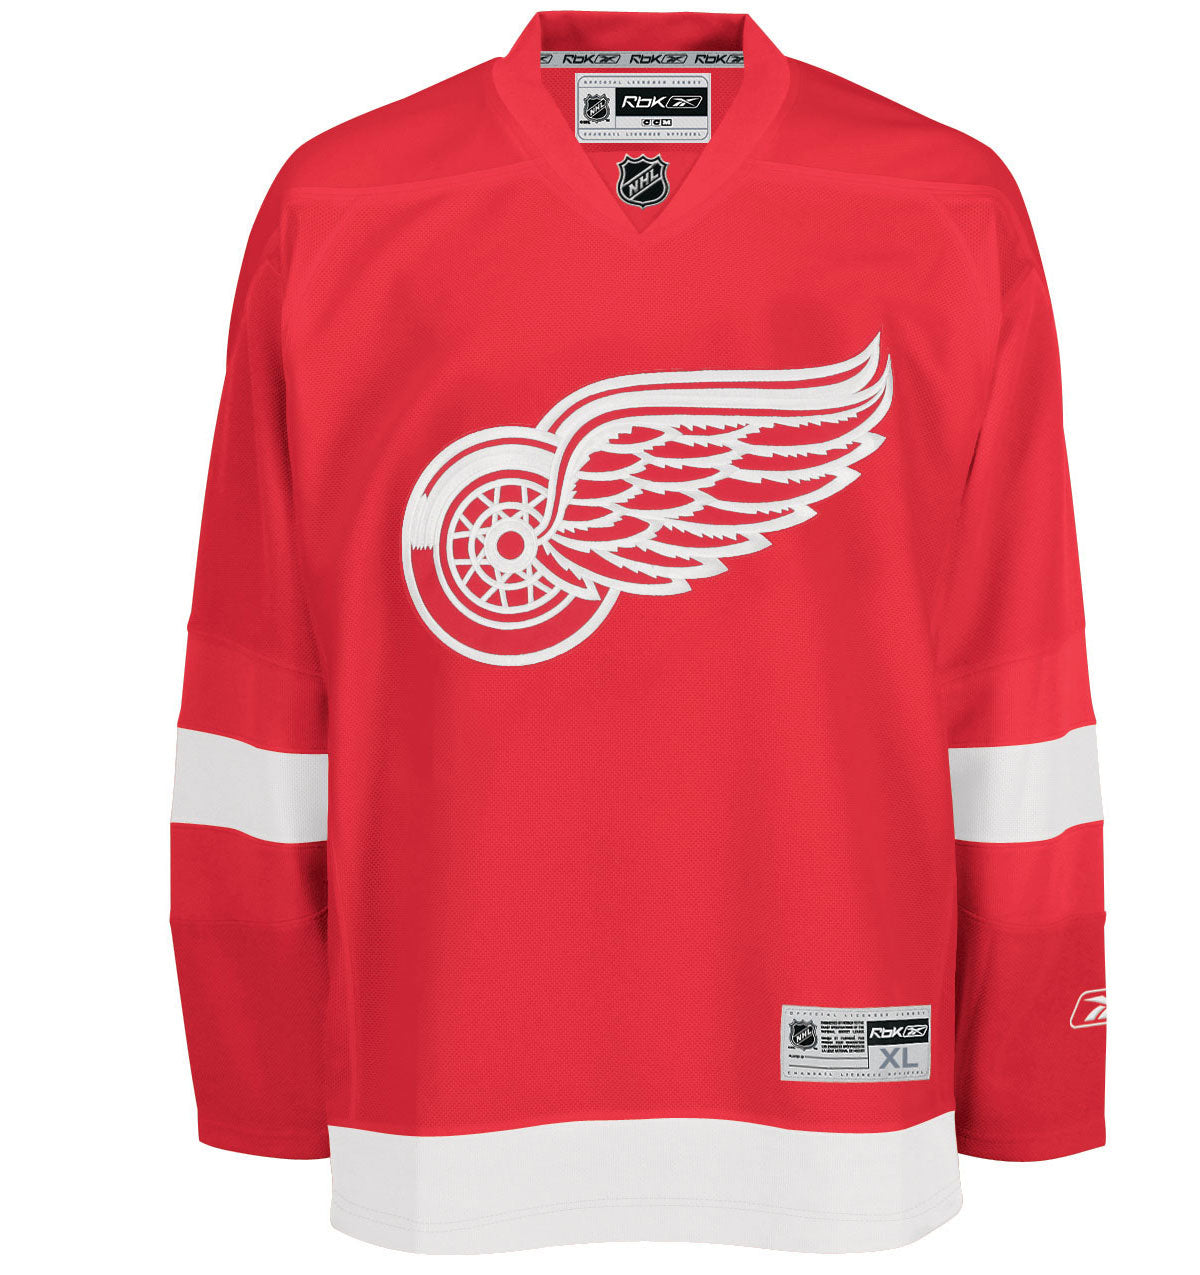 OFFICIAL PATCH FOR DETROIT RED WINGS 